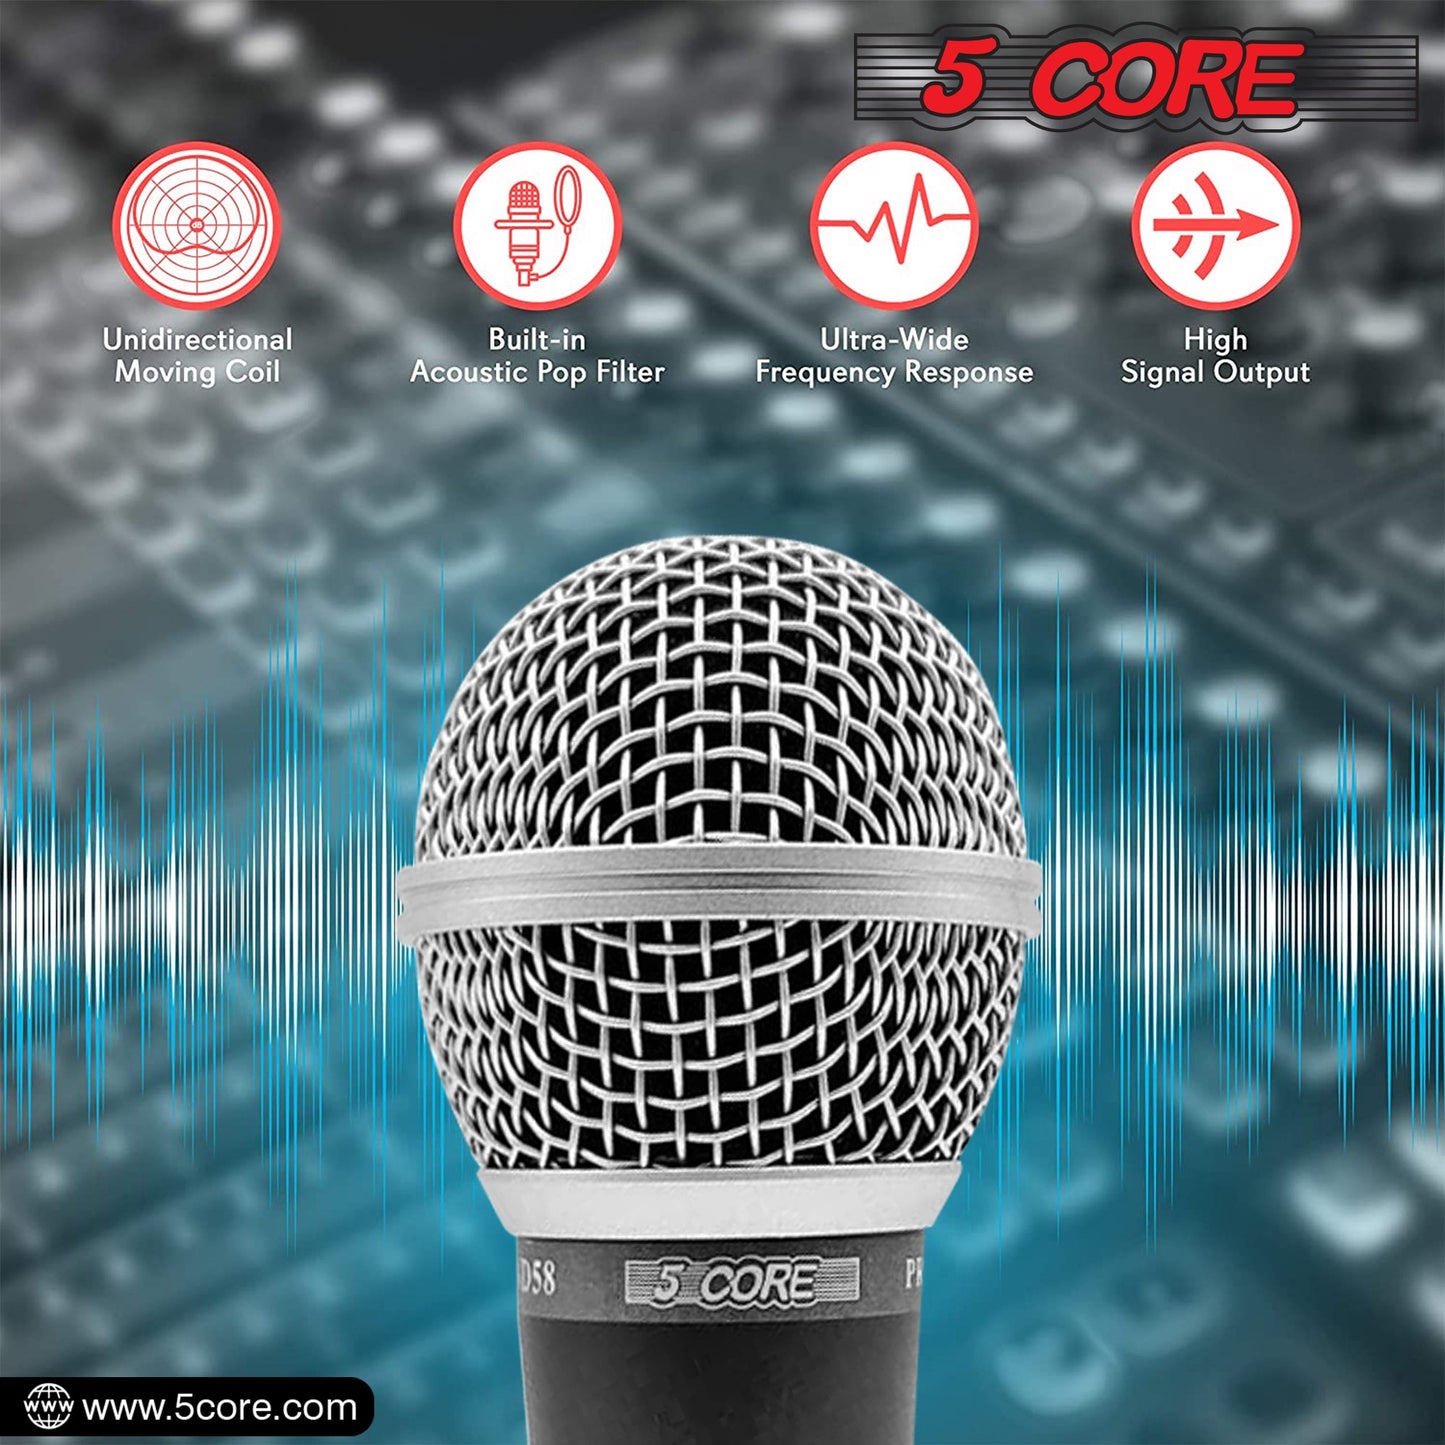 The 5 Core Premium Vocal Dynamic Cardioid Handheld Microphone and Stand combo offers high-quality audio support for karaoke singing and other activities MS DBL+ND58+ND57-2